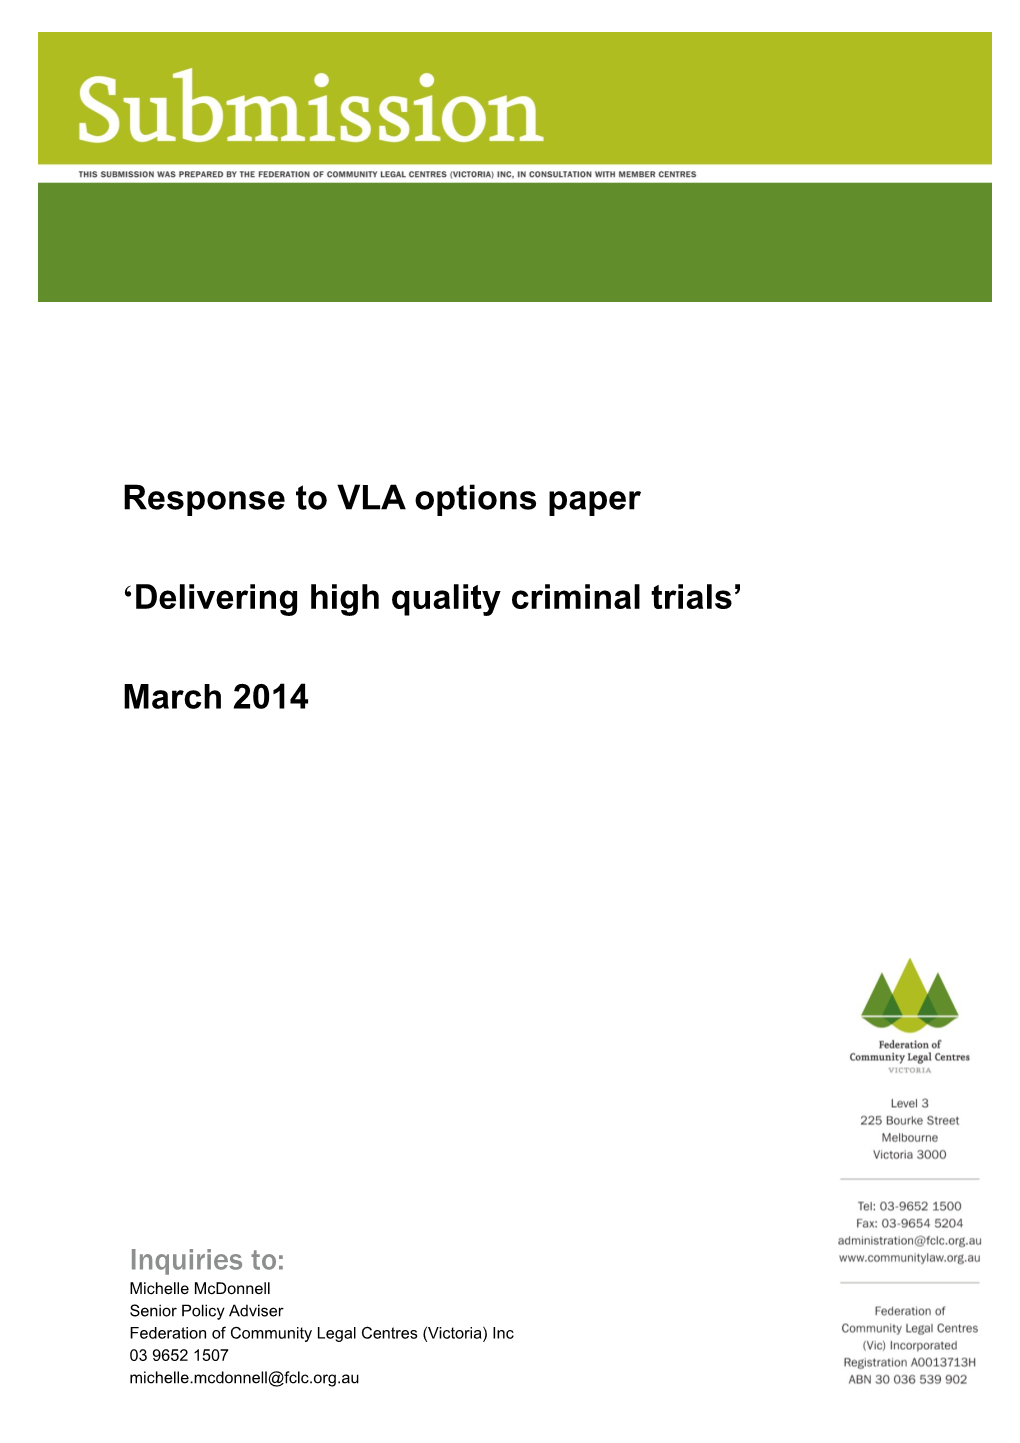 Response to VLA Options Paper 'Delivering High Quality Criminal Trials'